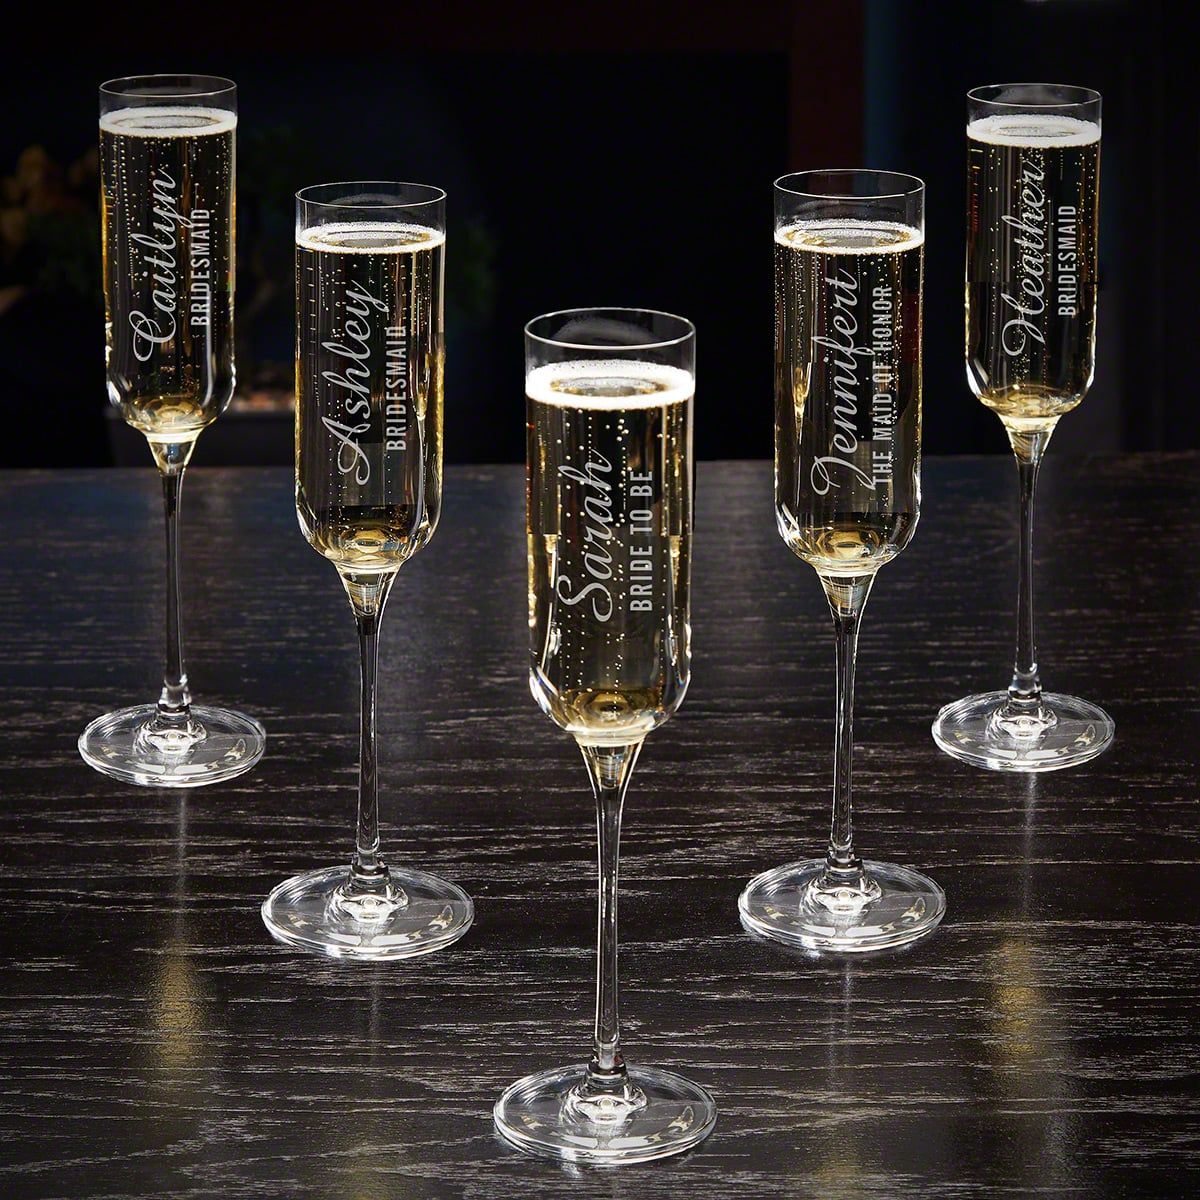 https://images.homewetbar.com/media/catalog/product/w/e/wedding-party-champagne-flutes_-set-of-five-p_8065.jpg?store=default&image-type=image